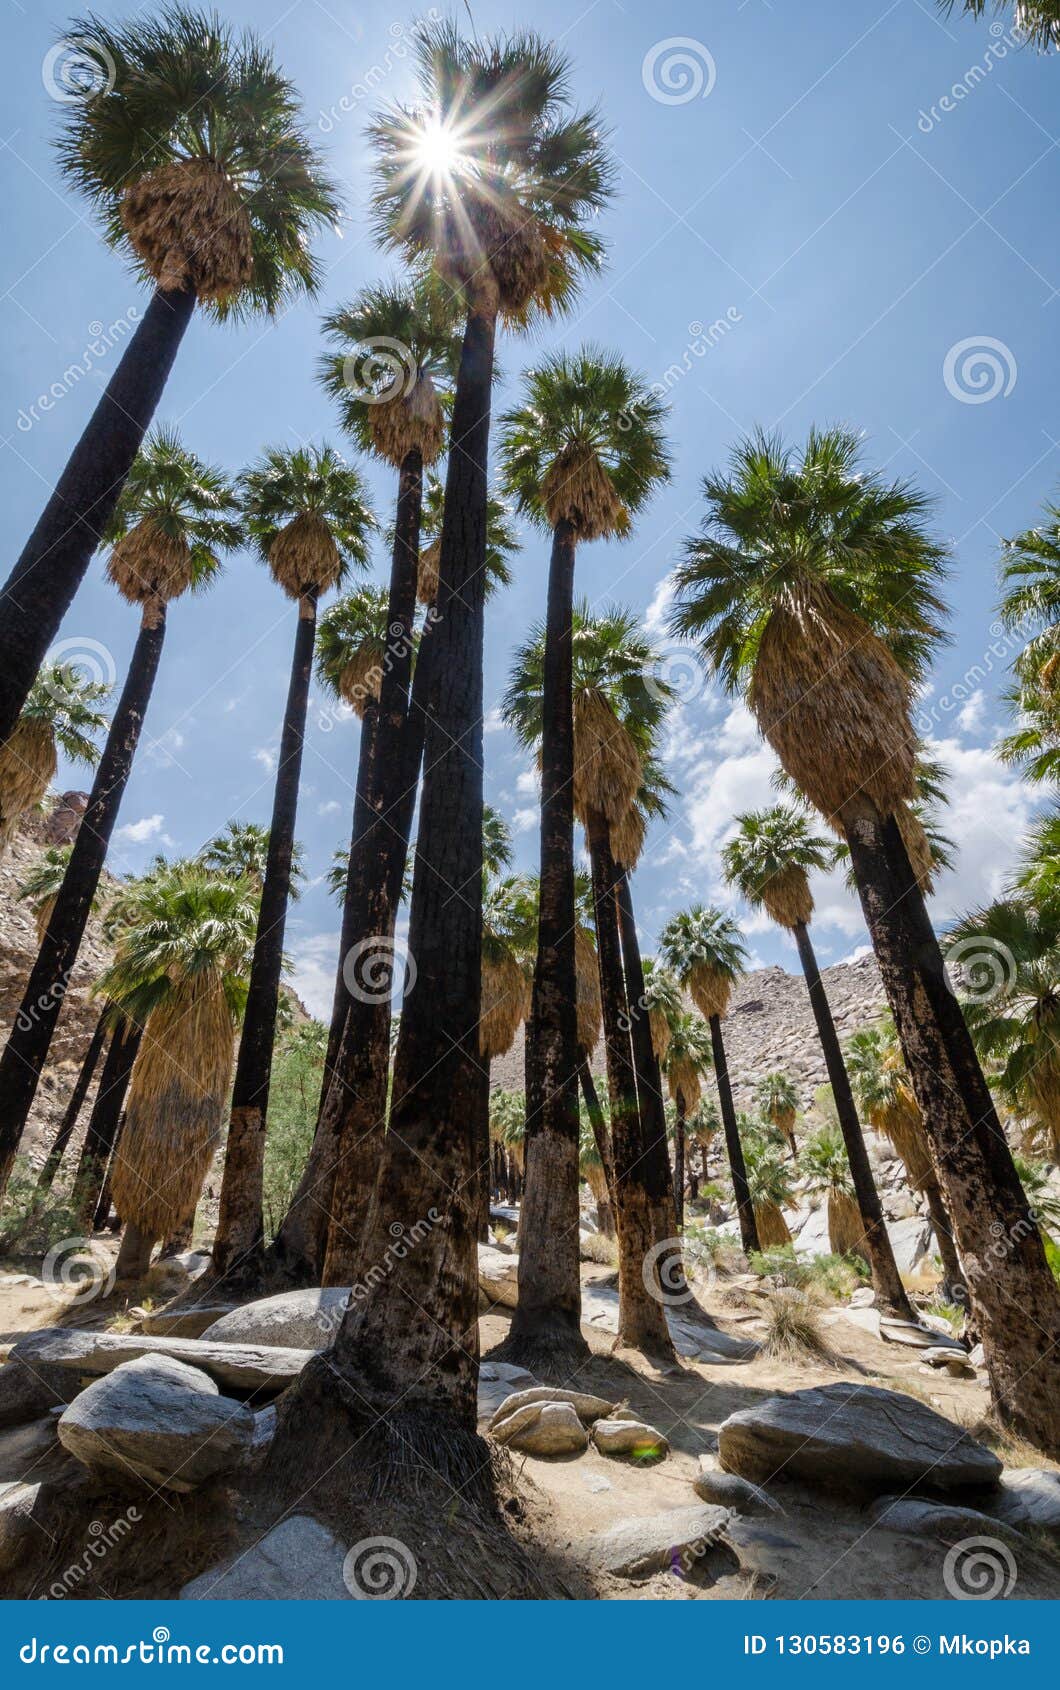 fan palm trees in the indian canyons near palm springs california